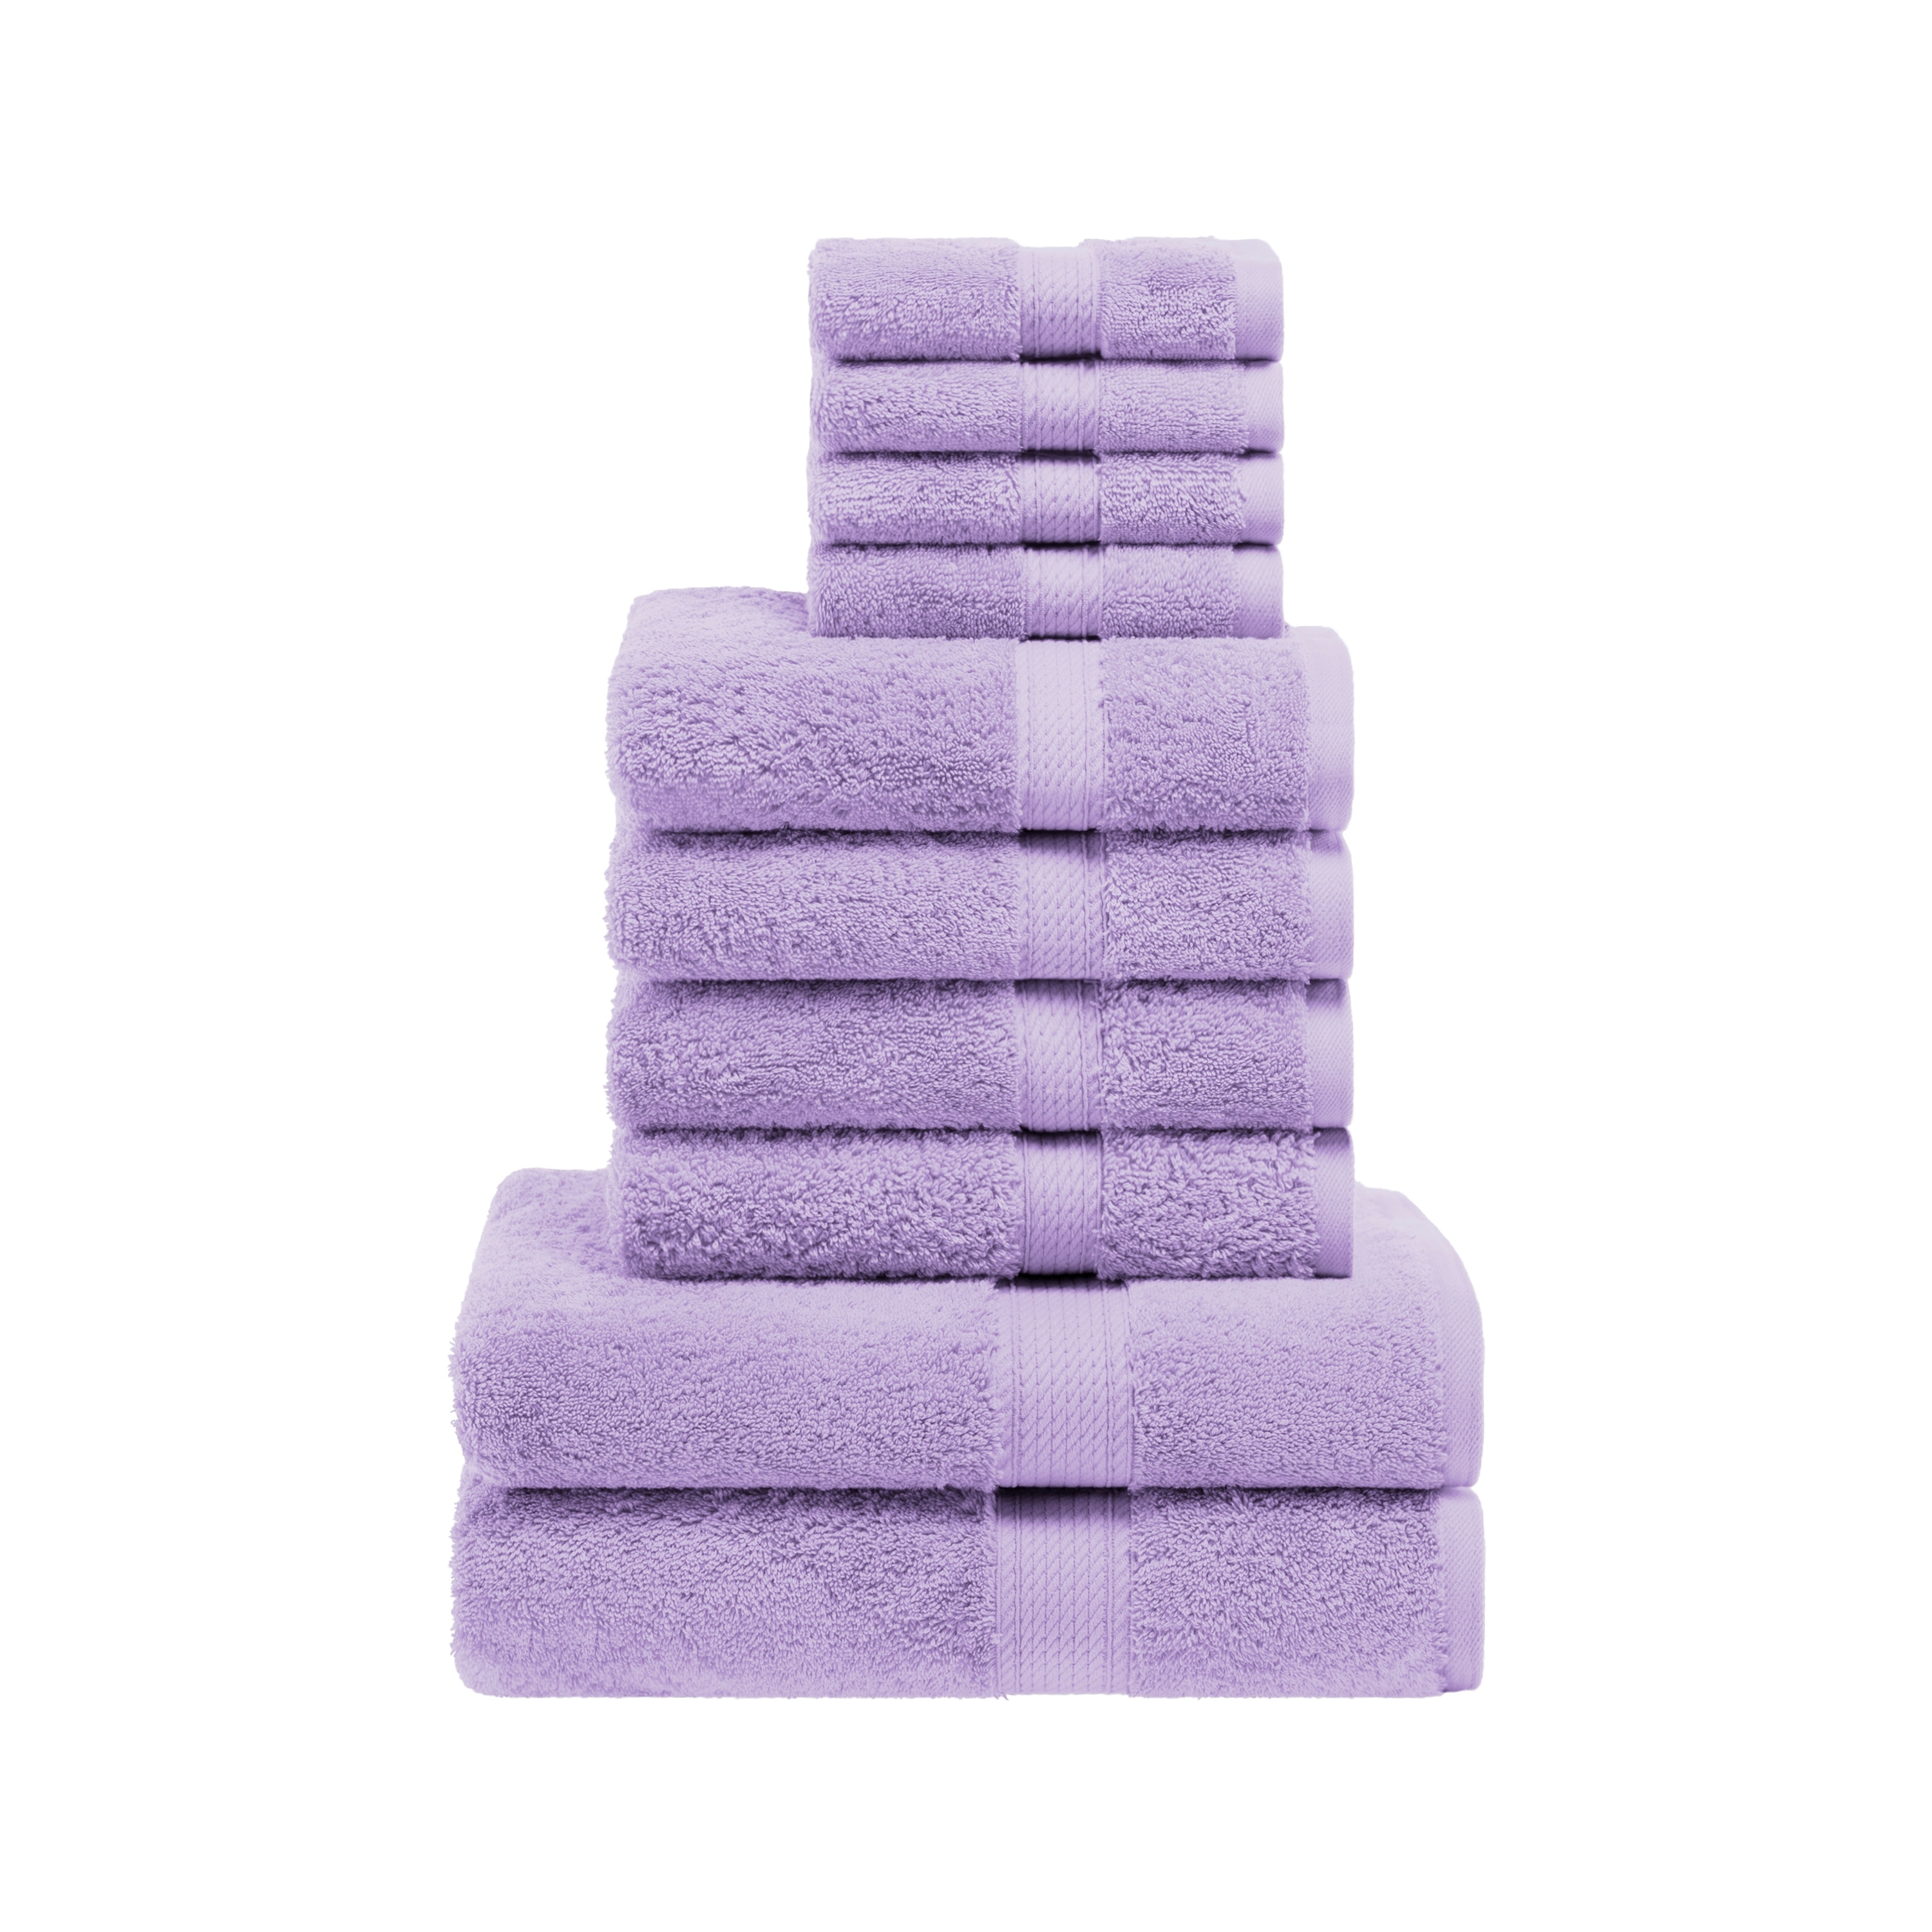 https://ak1.ostkcdn.com/images/products/is/images/direct/257ca5a0791d4ec68338619f7c3535d32620c05d/Egyptian-Cotton-Heavyweight-Solid-Plush-Towel-Set-by-Superior.jpg